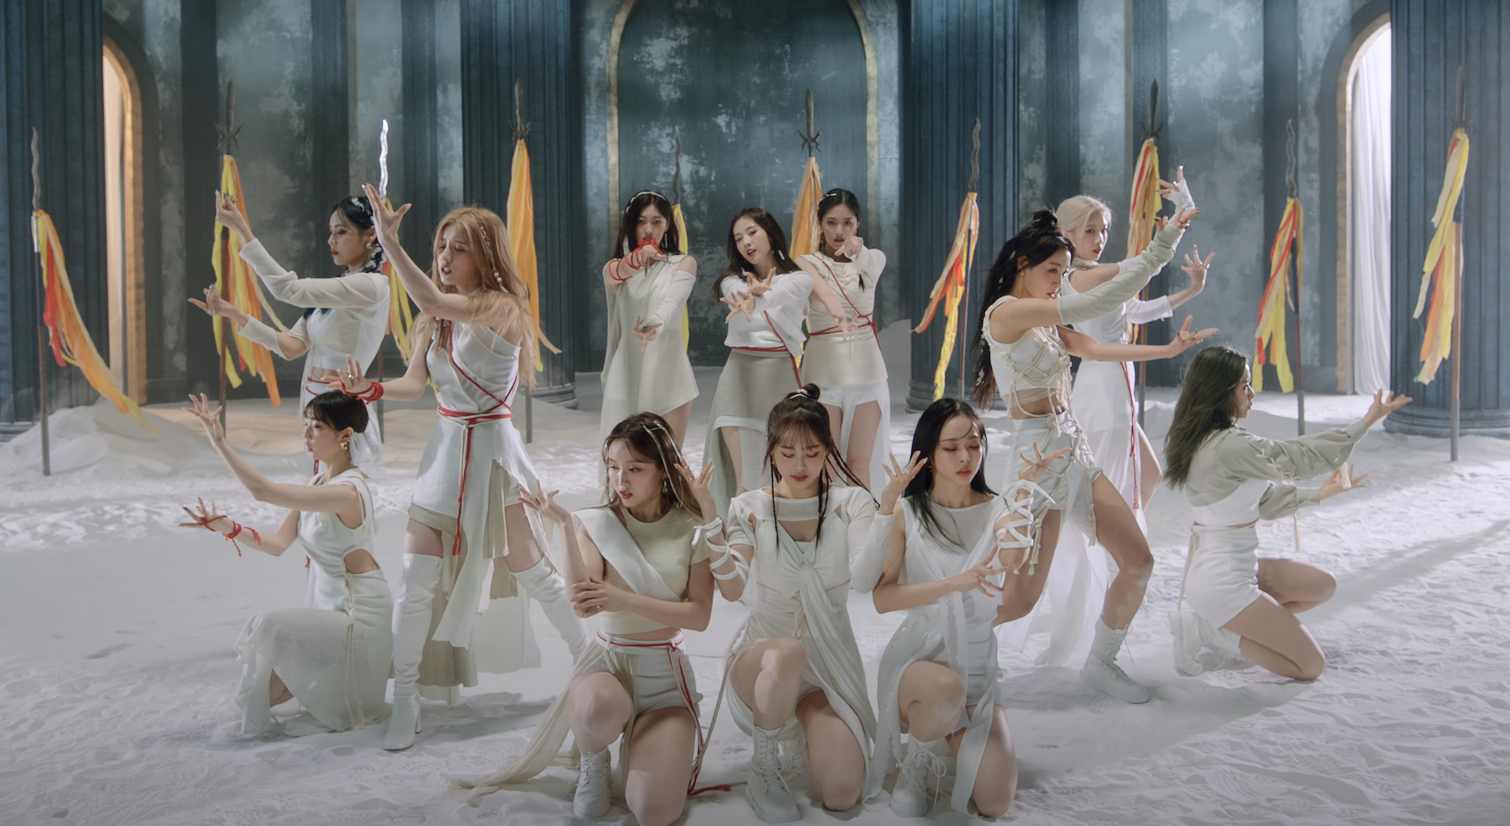 LOONA in the &quot;Paint the World&quot; music video